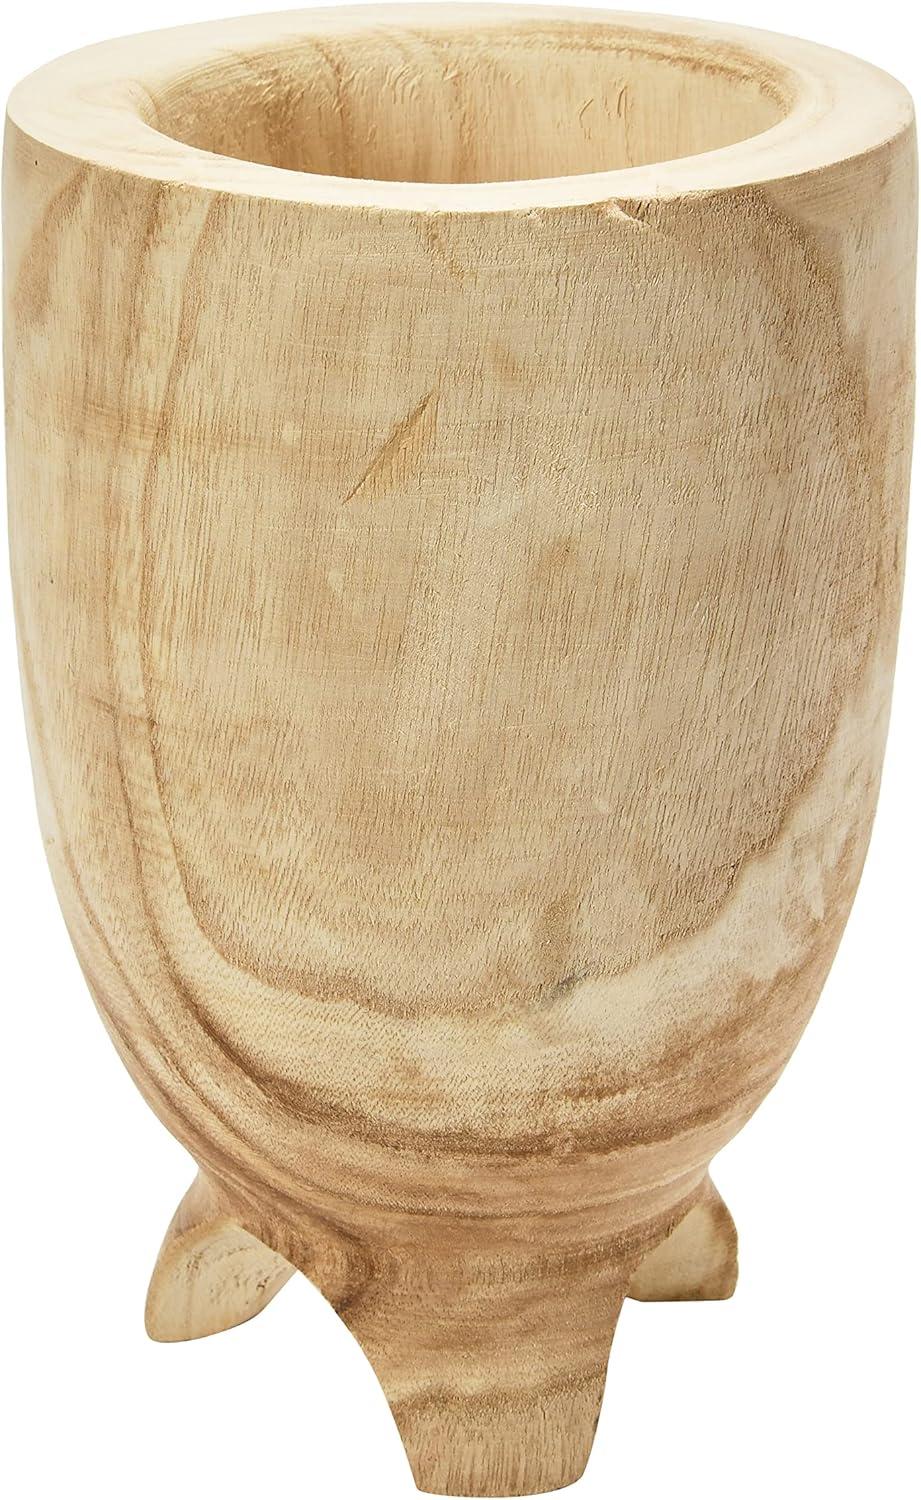 Carved Paulownia Wood Footed Planter for Indoor/Outdoor Decor